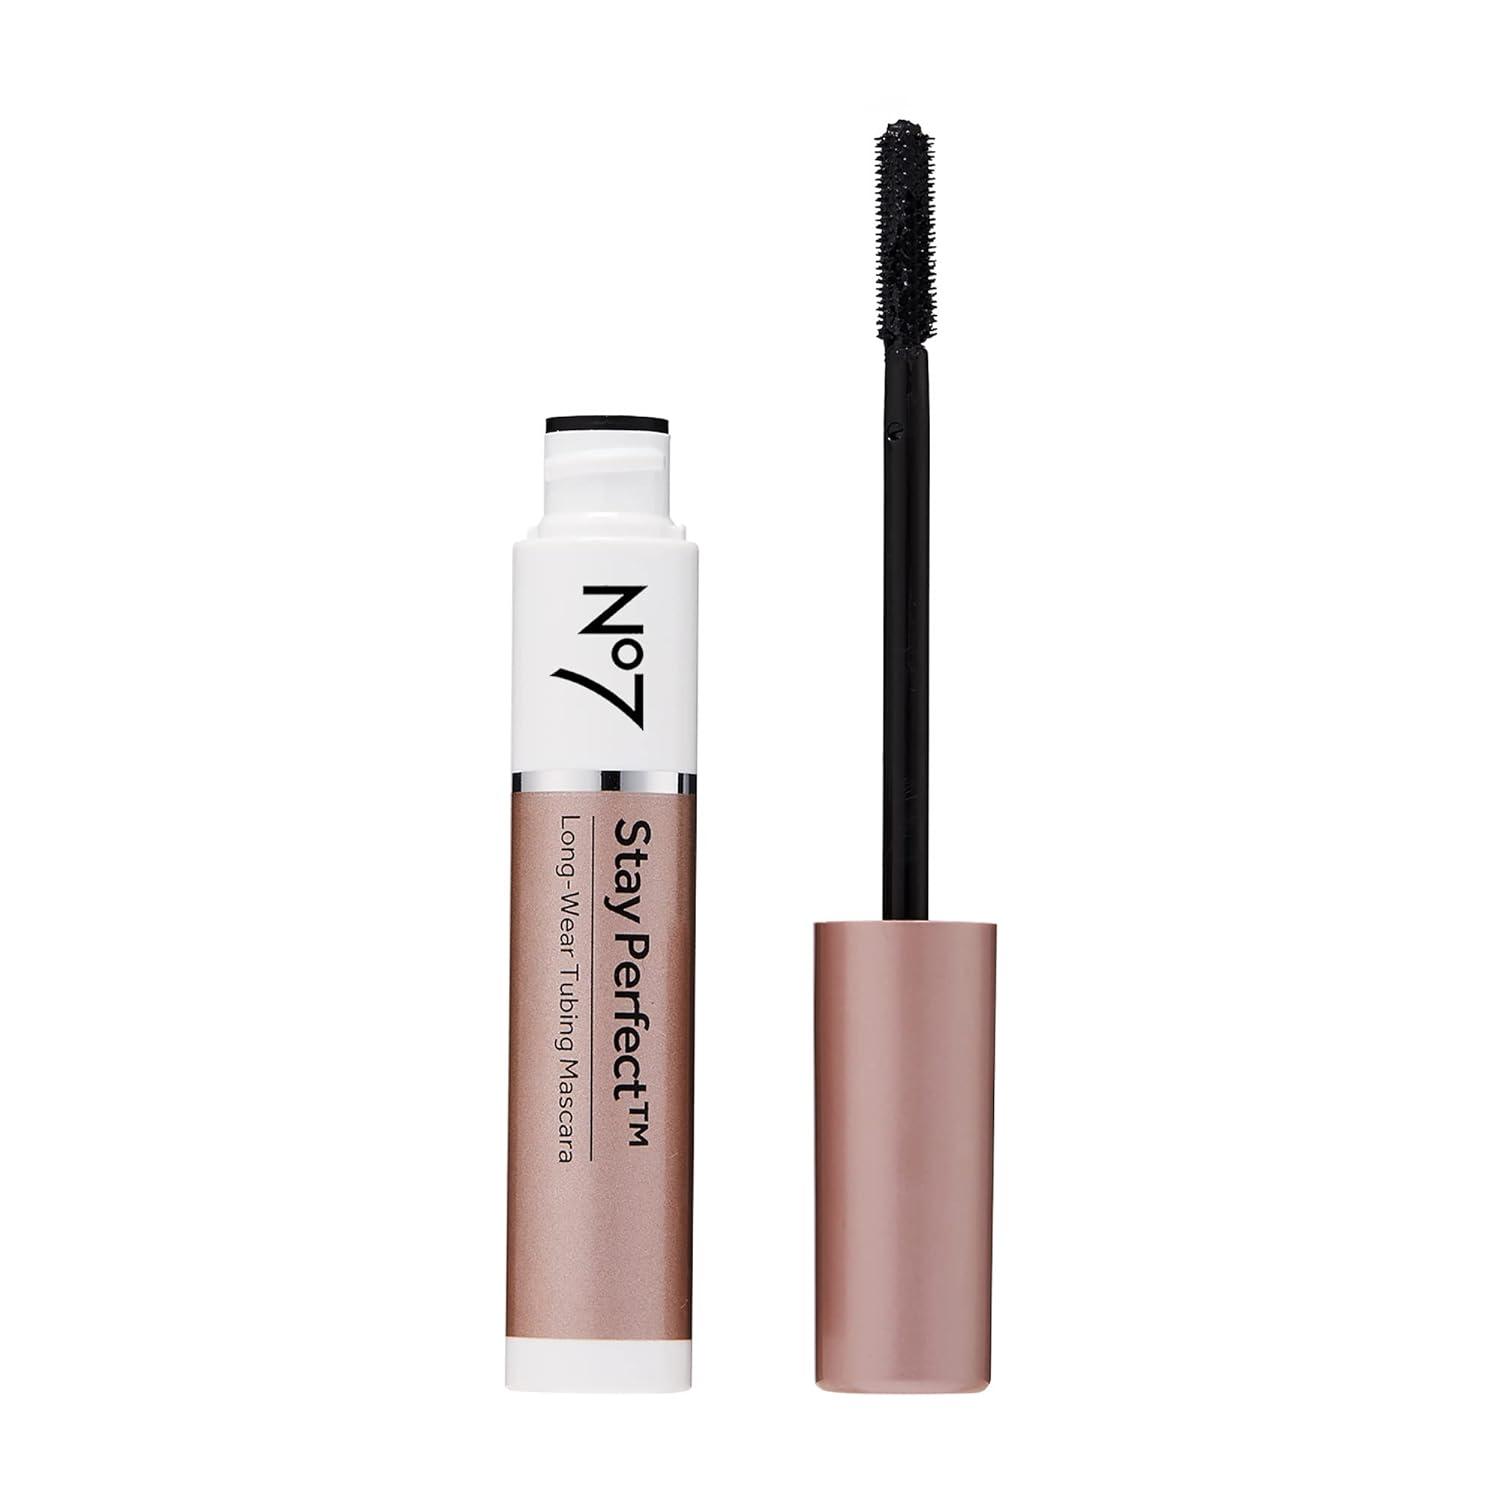 Smudge-Free Mascara with Straight Brush Applicator for Long-Lasting Volume Up to 24 Hours